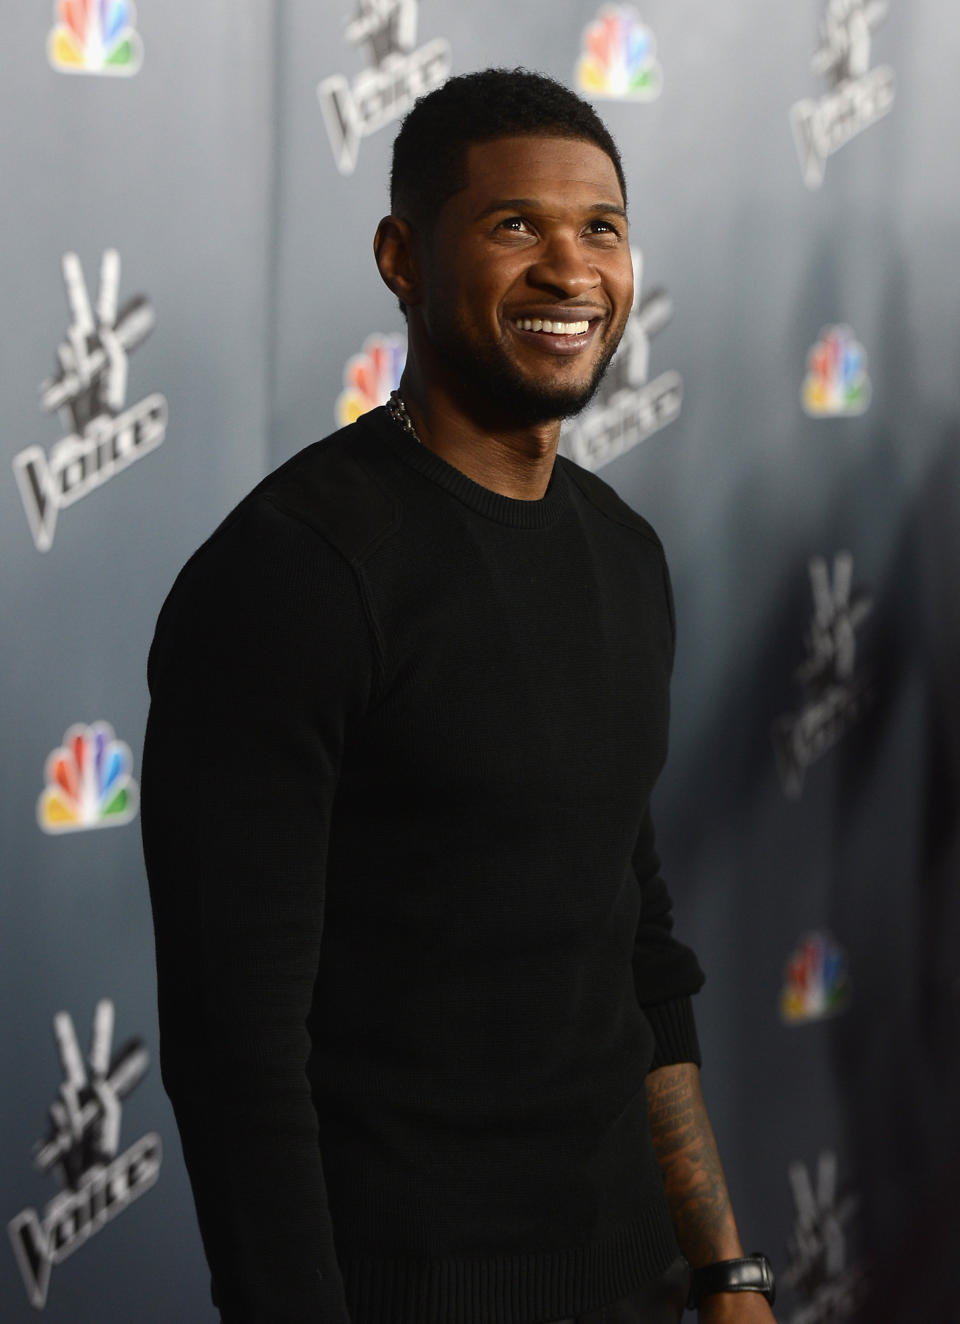 HOLLYWOOD, CA - MARCH 20:  Singer Usher arrives at the screening of NBC's 'The Voice' Season 4 at TCL Chinese Theatre on March 20, 2013 in Hollywood, California.  (Photo by Kevin Winter/Getty Images)